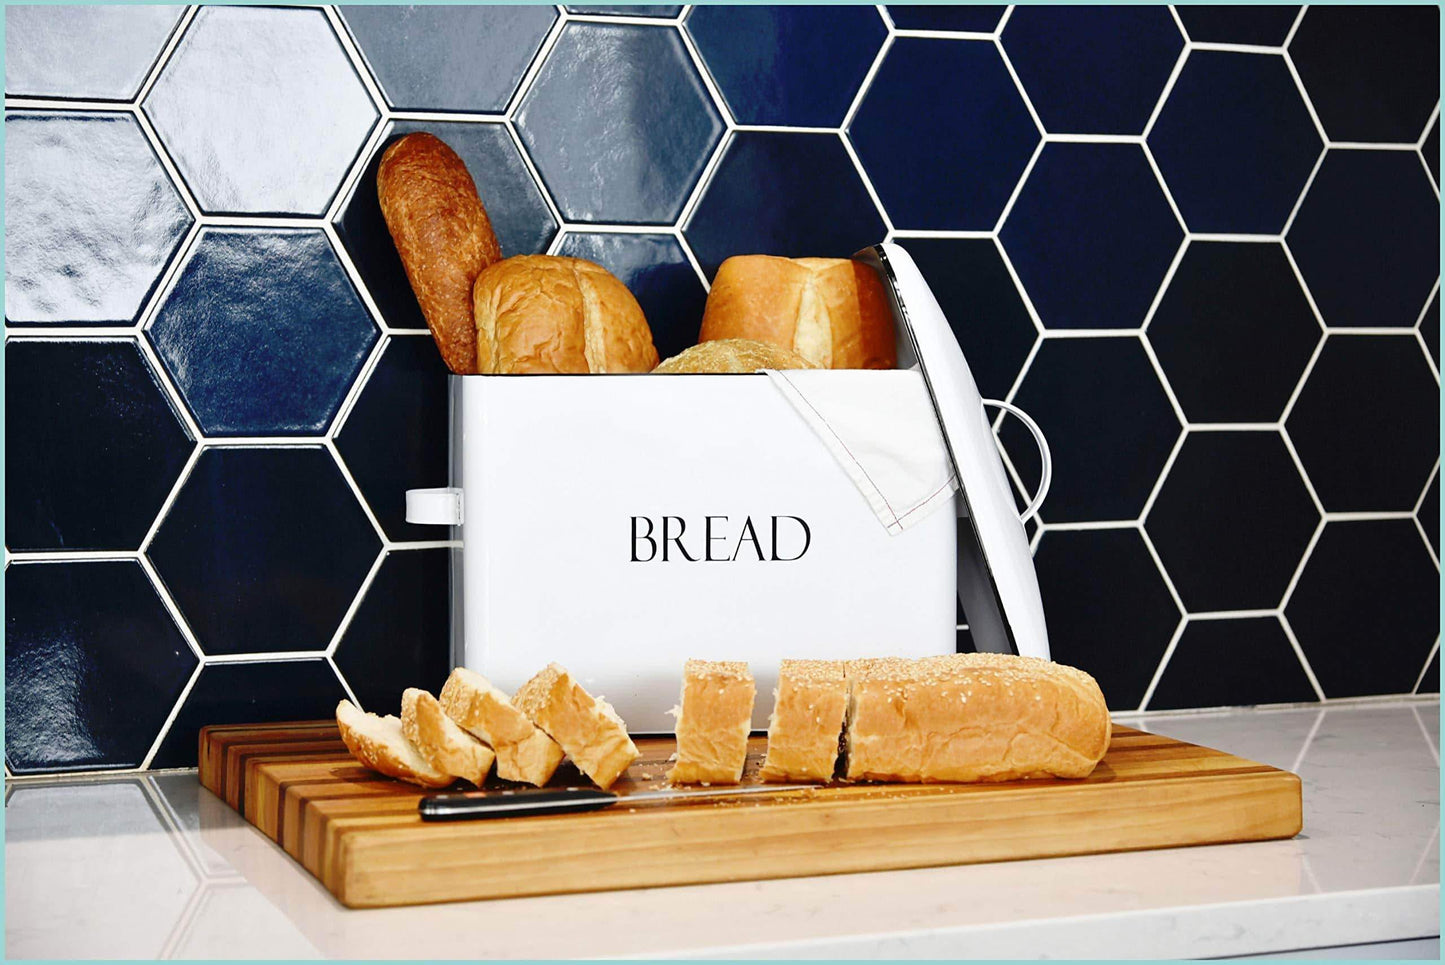 Online shopping outshine vintage metal bread bin countertop space saving extra large high capacity bread storage box for your kitchen holds 2 loaves 13 x 10 x 7 white with bread lettering